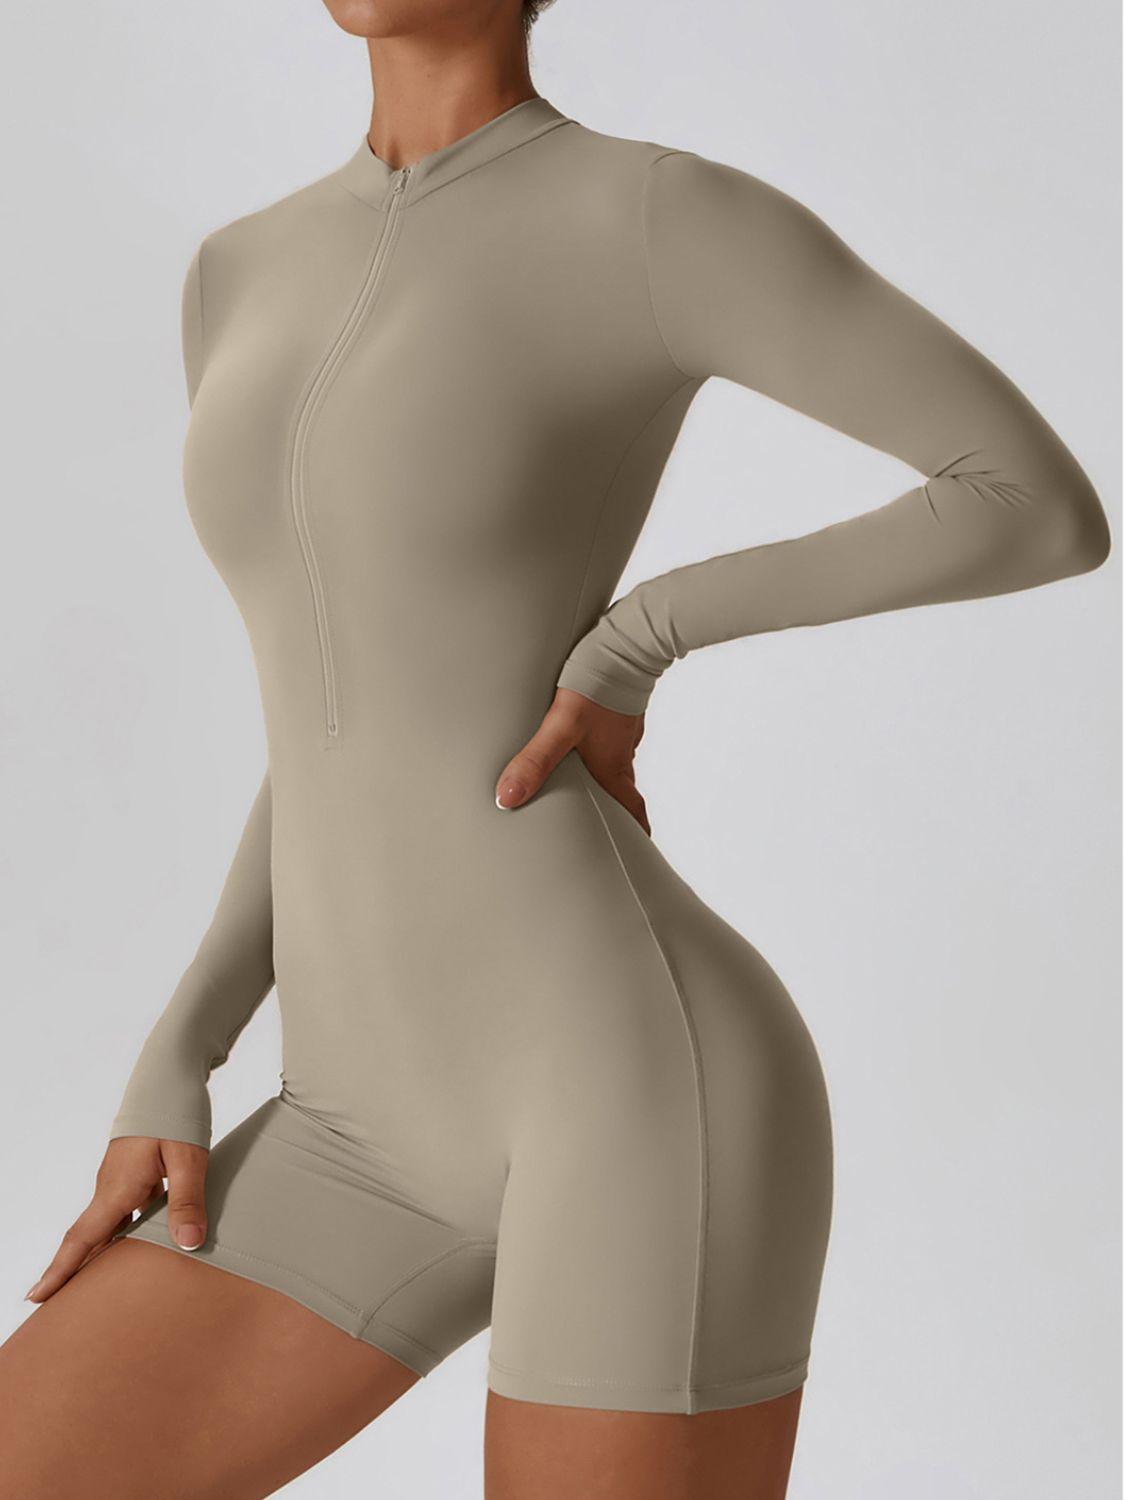 a woman in a bodysuit with her hands on her hips